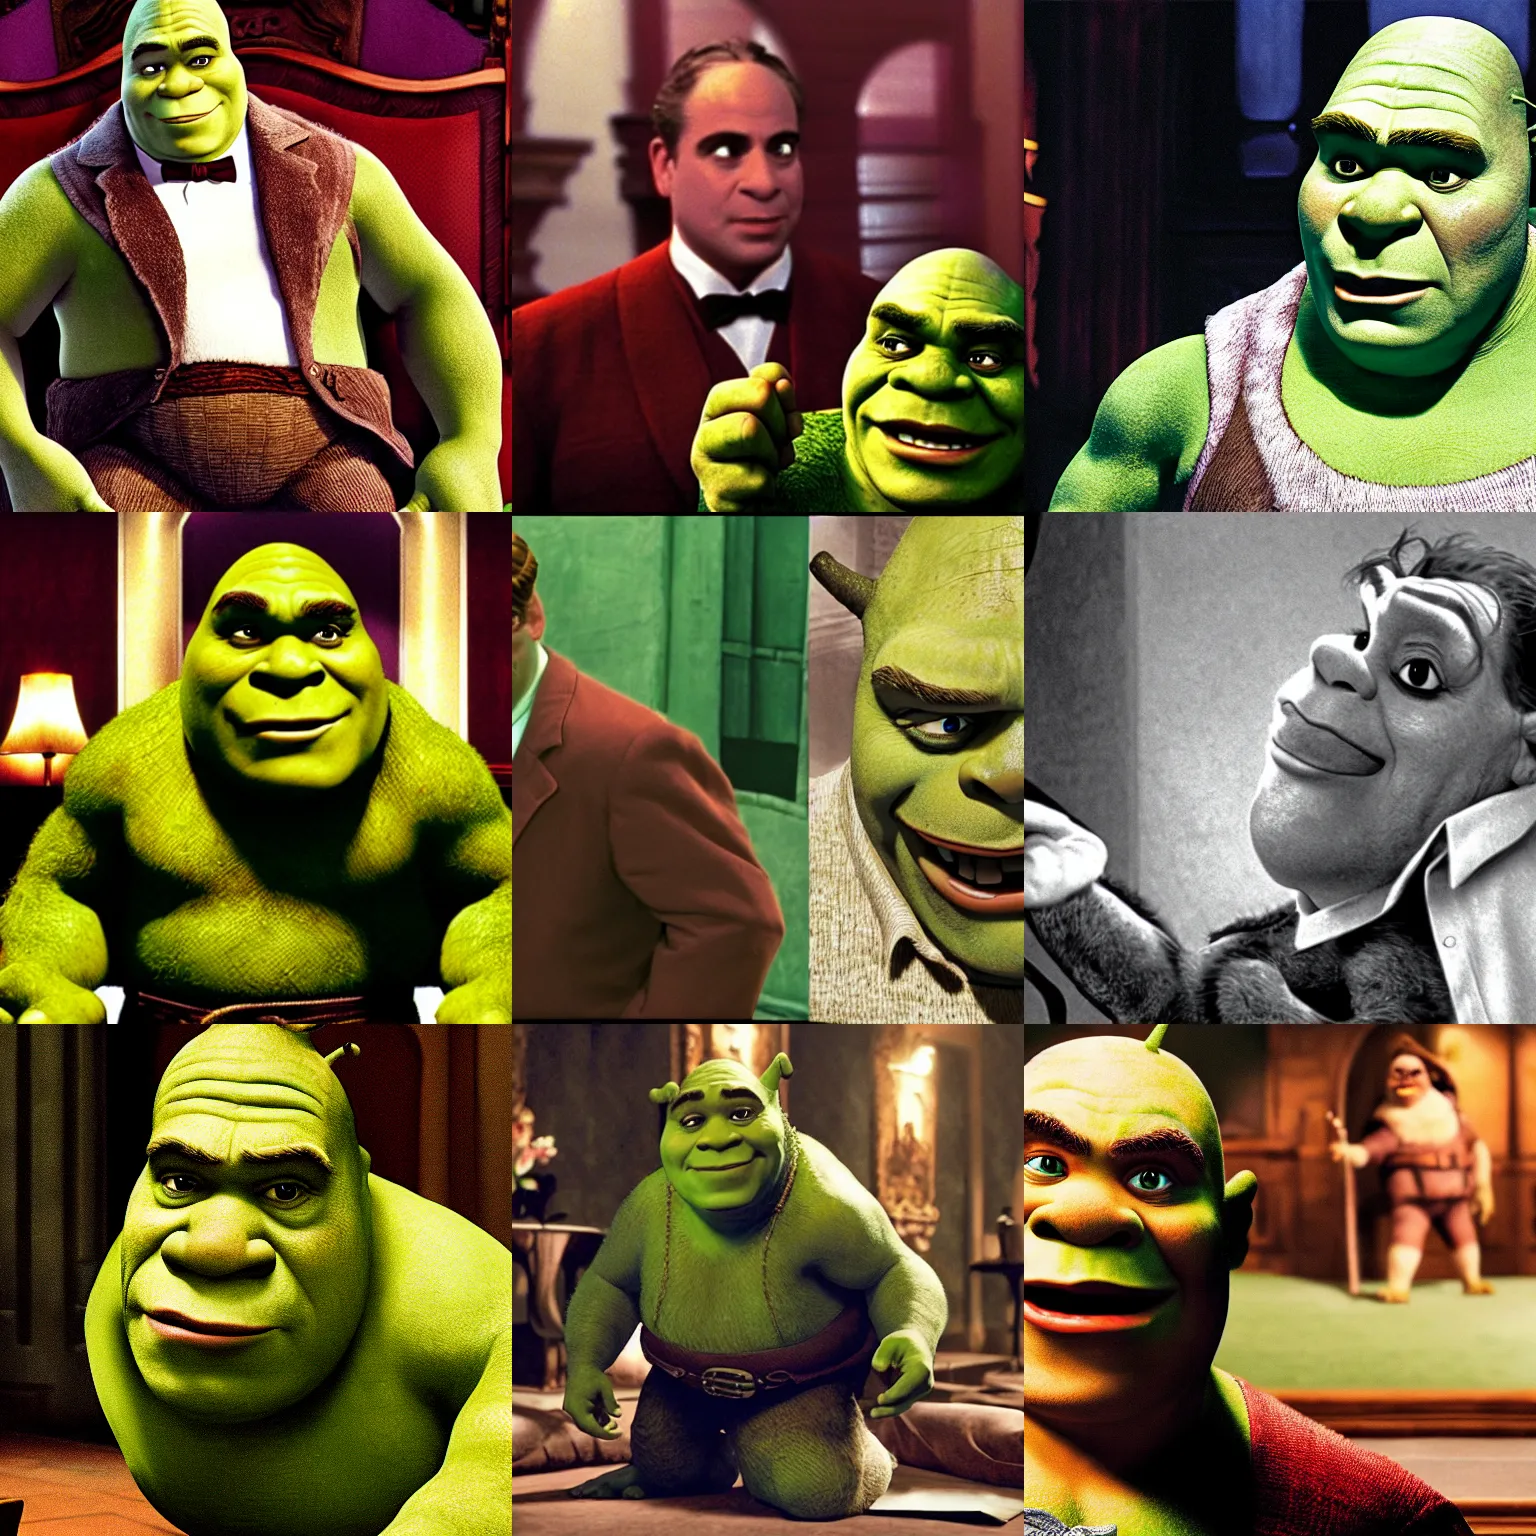 Prompt: Cinemetic Photograph of Shrek in Godfather